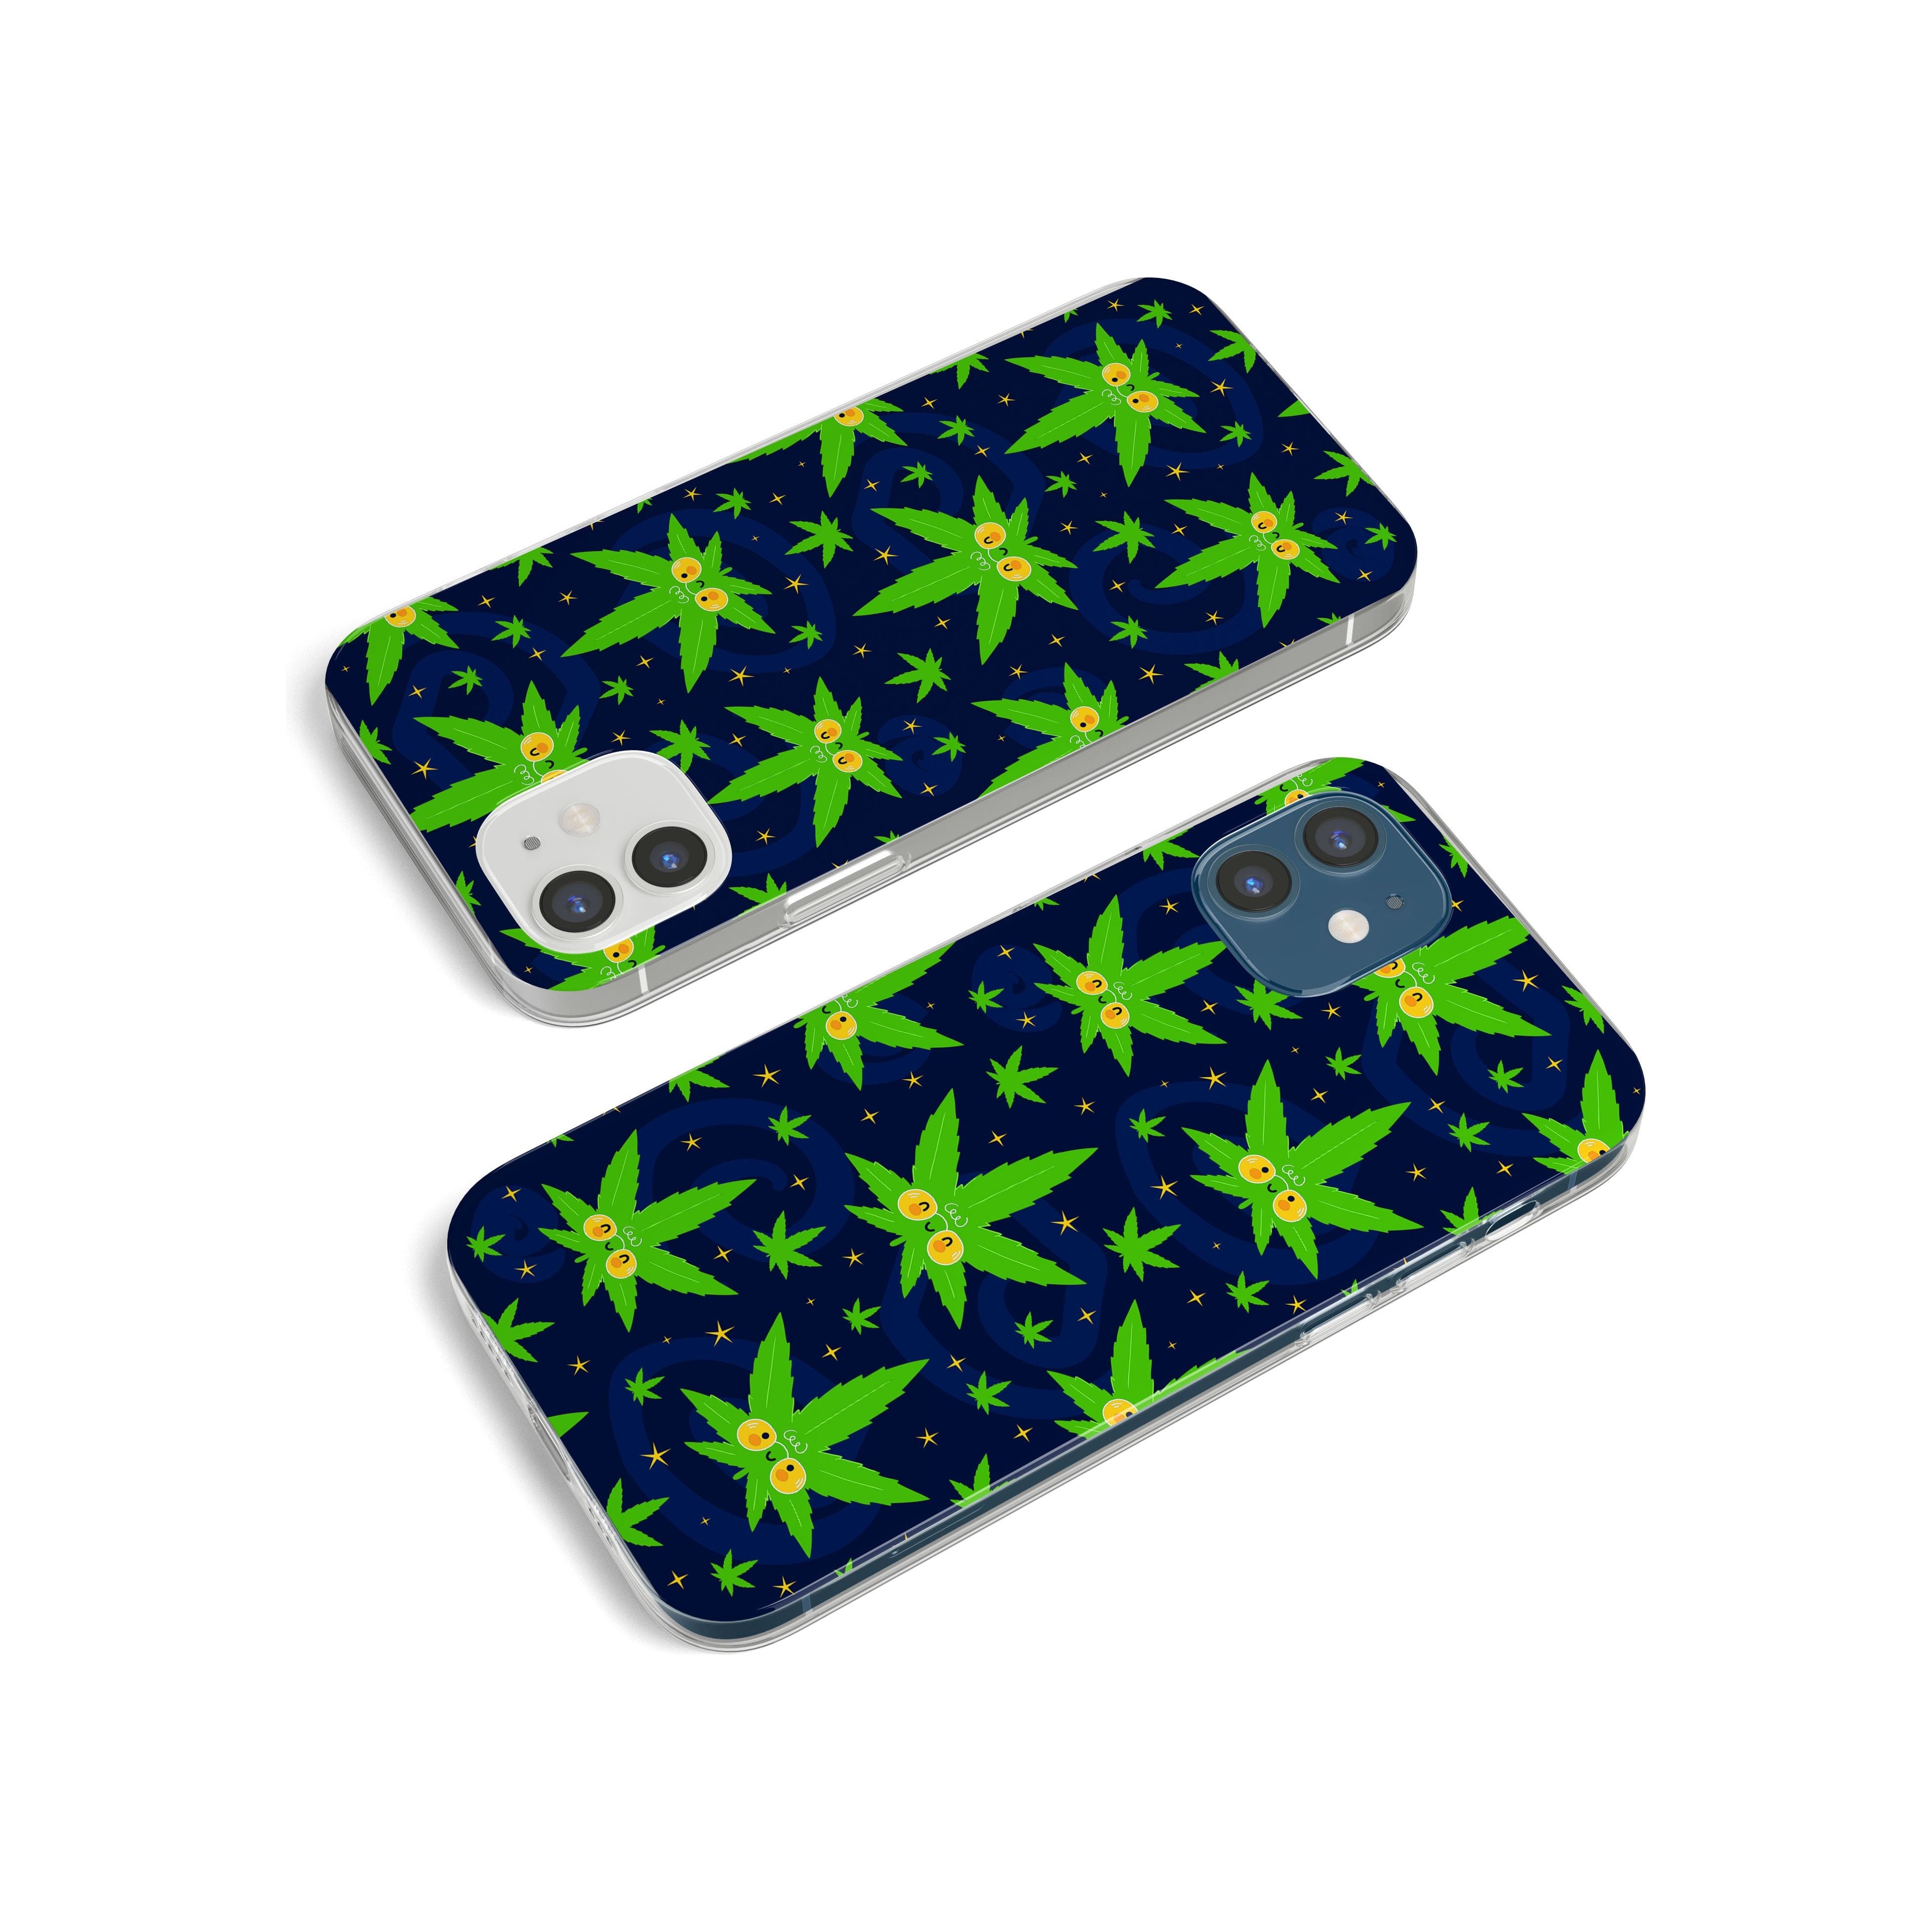 Martians & Munchies Impact Phone Case for iPhone 11, iphone 12